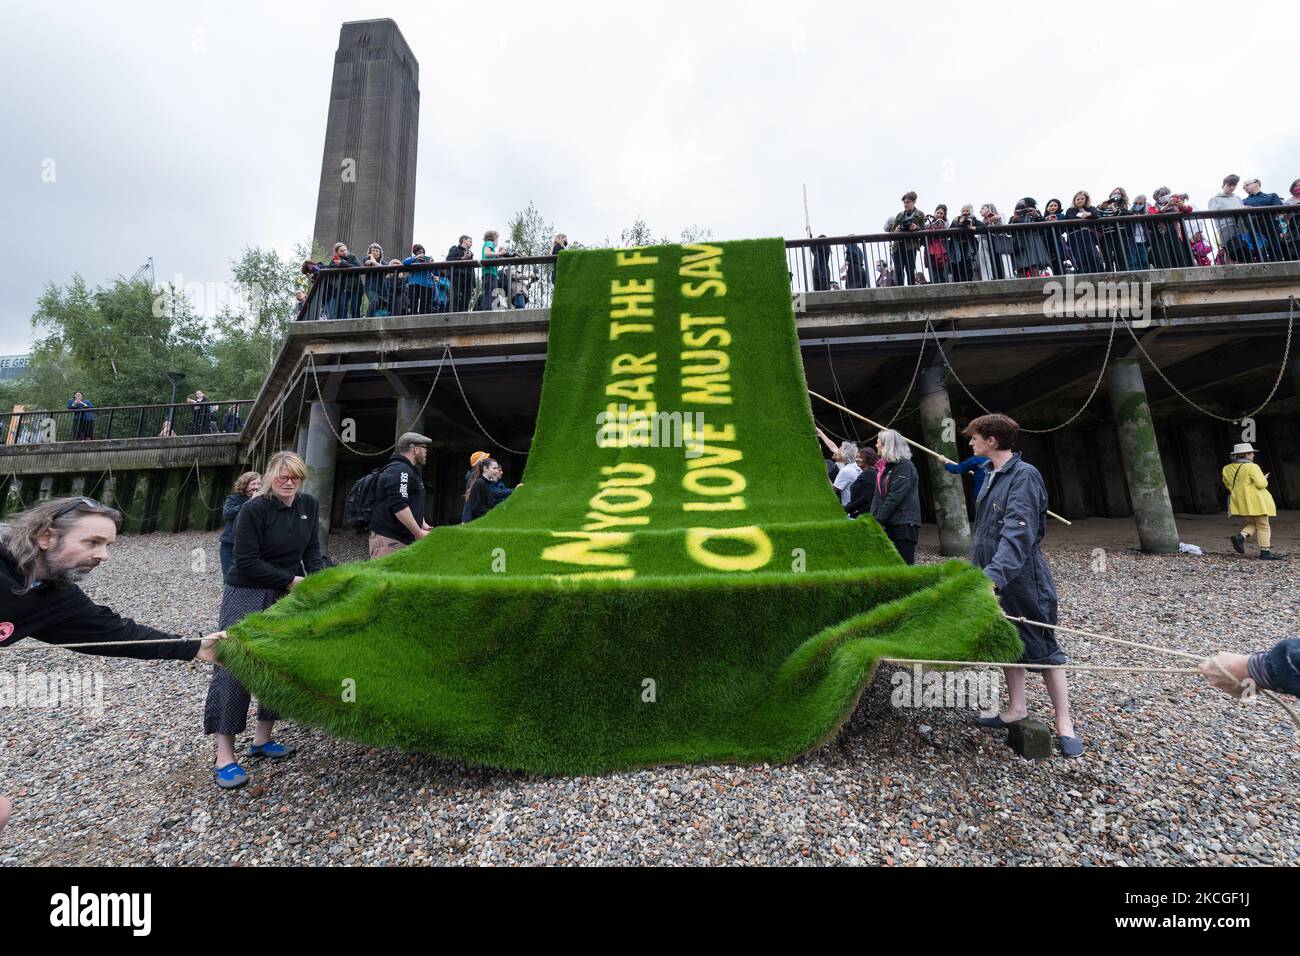 LONDON, UNITED KINGDOM - JUNE 25, 2021: Activists from Extinction Rebellion carry a banner with a message grown on living grass on the bank of River Thames outside Tate Modern to draw attention to the climate and ecological emergency on June 25, 2021 in London, England. The banner, created by the acclaimed artist-activists Ackroyd & Harvey, with an appeal from Booker prize-winning writer Ben Okri calls on governments around the world to act with urgency in the lead-up to COP26 summit to prevent climate and ecological collapse brought by global warming. (Photo by WIktor Szymanowicz/NurPhoto) Stock Photo